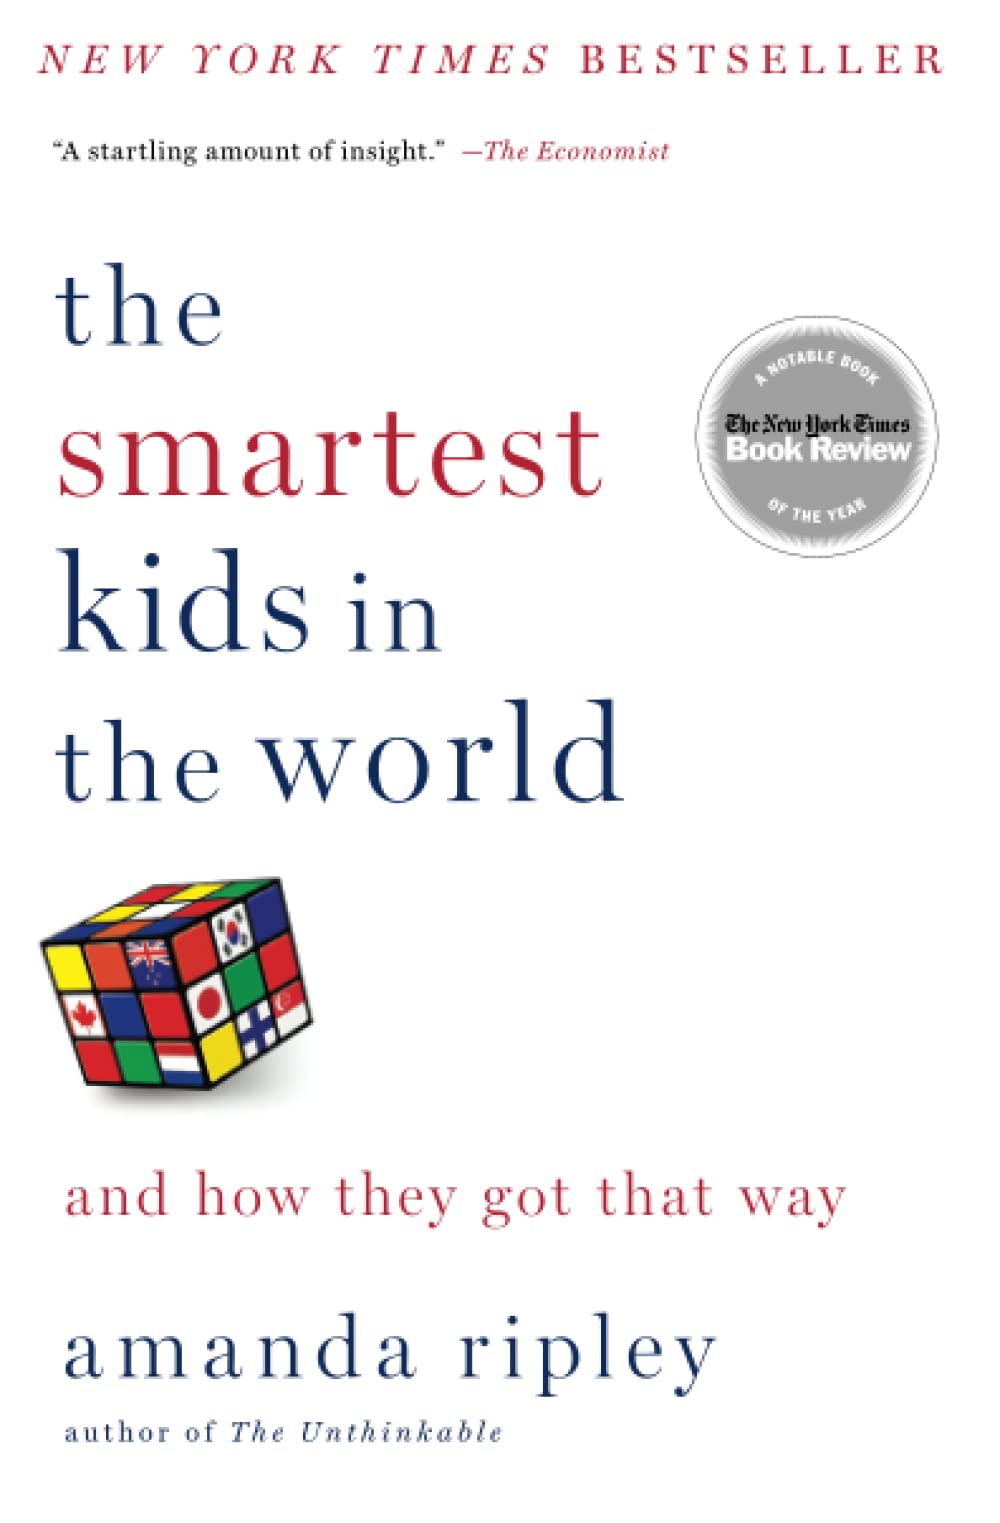 The book title The Smartest Kids in the World on a white book cover with a rubik's cube 